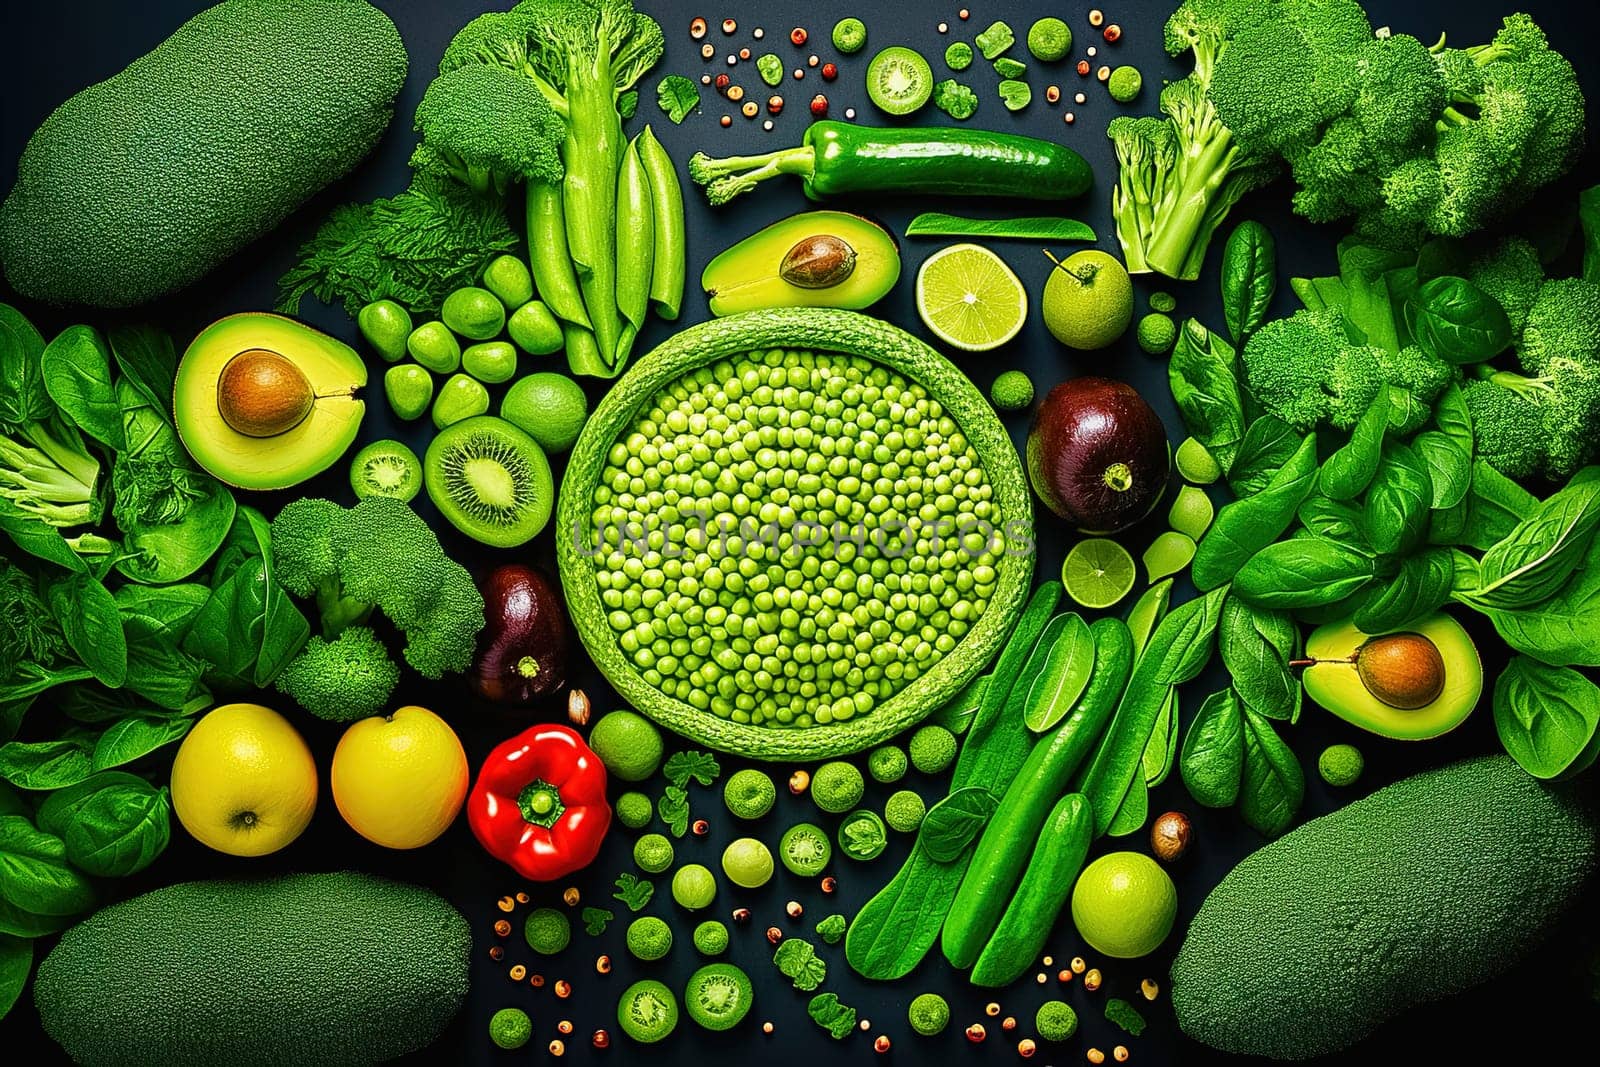 Assorted green vegetables and fruits. View from above. by Yurich32